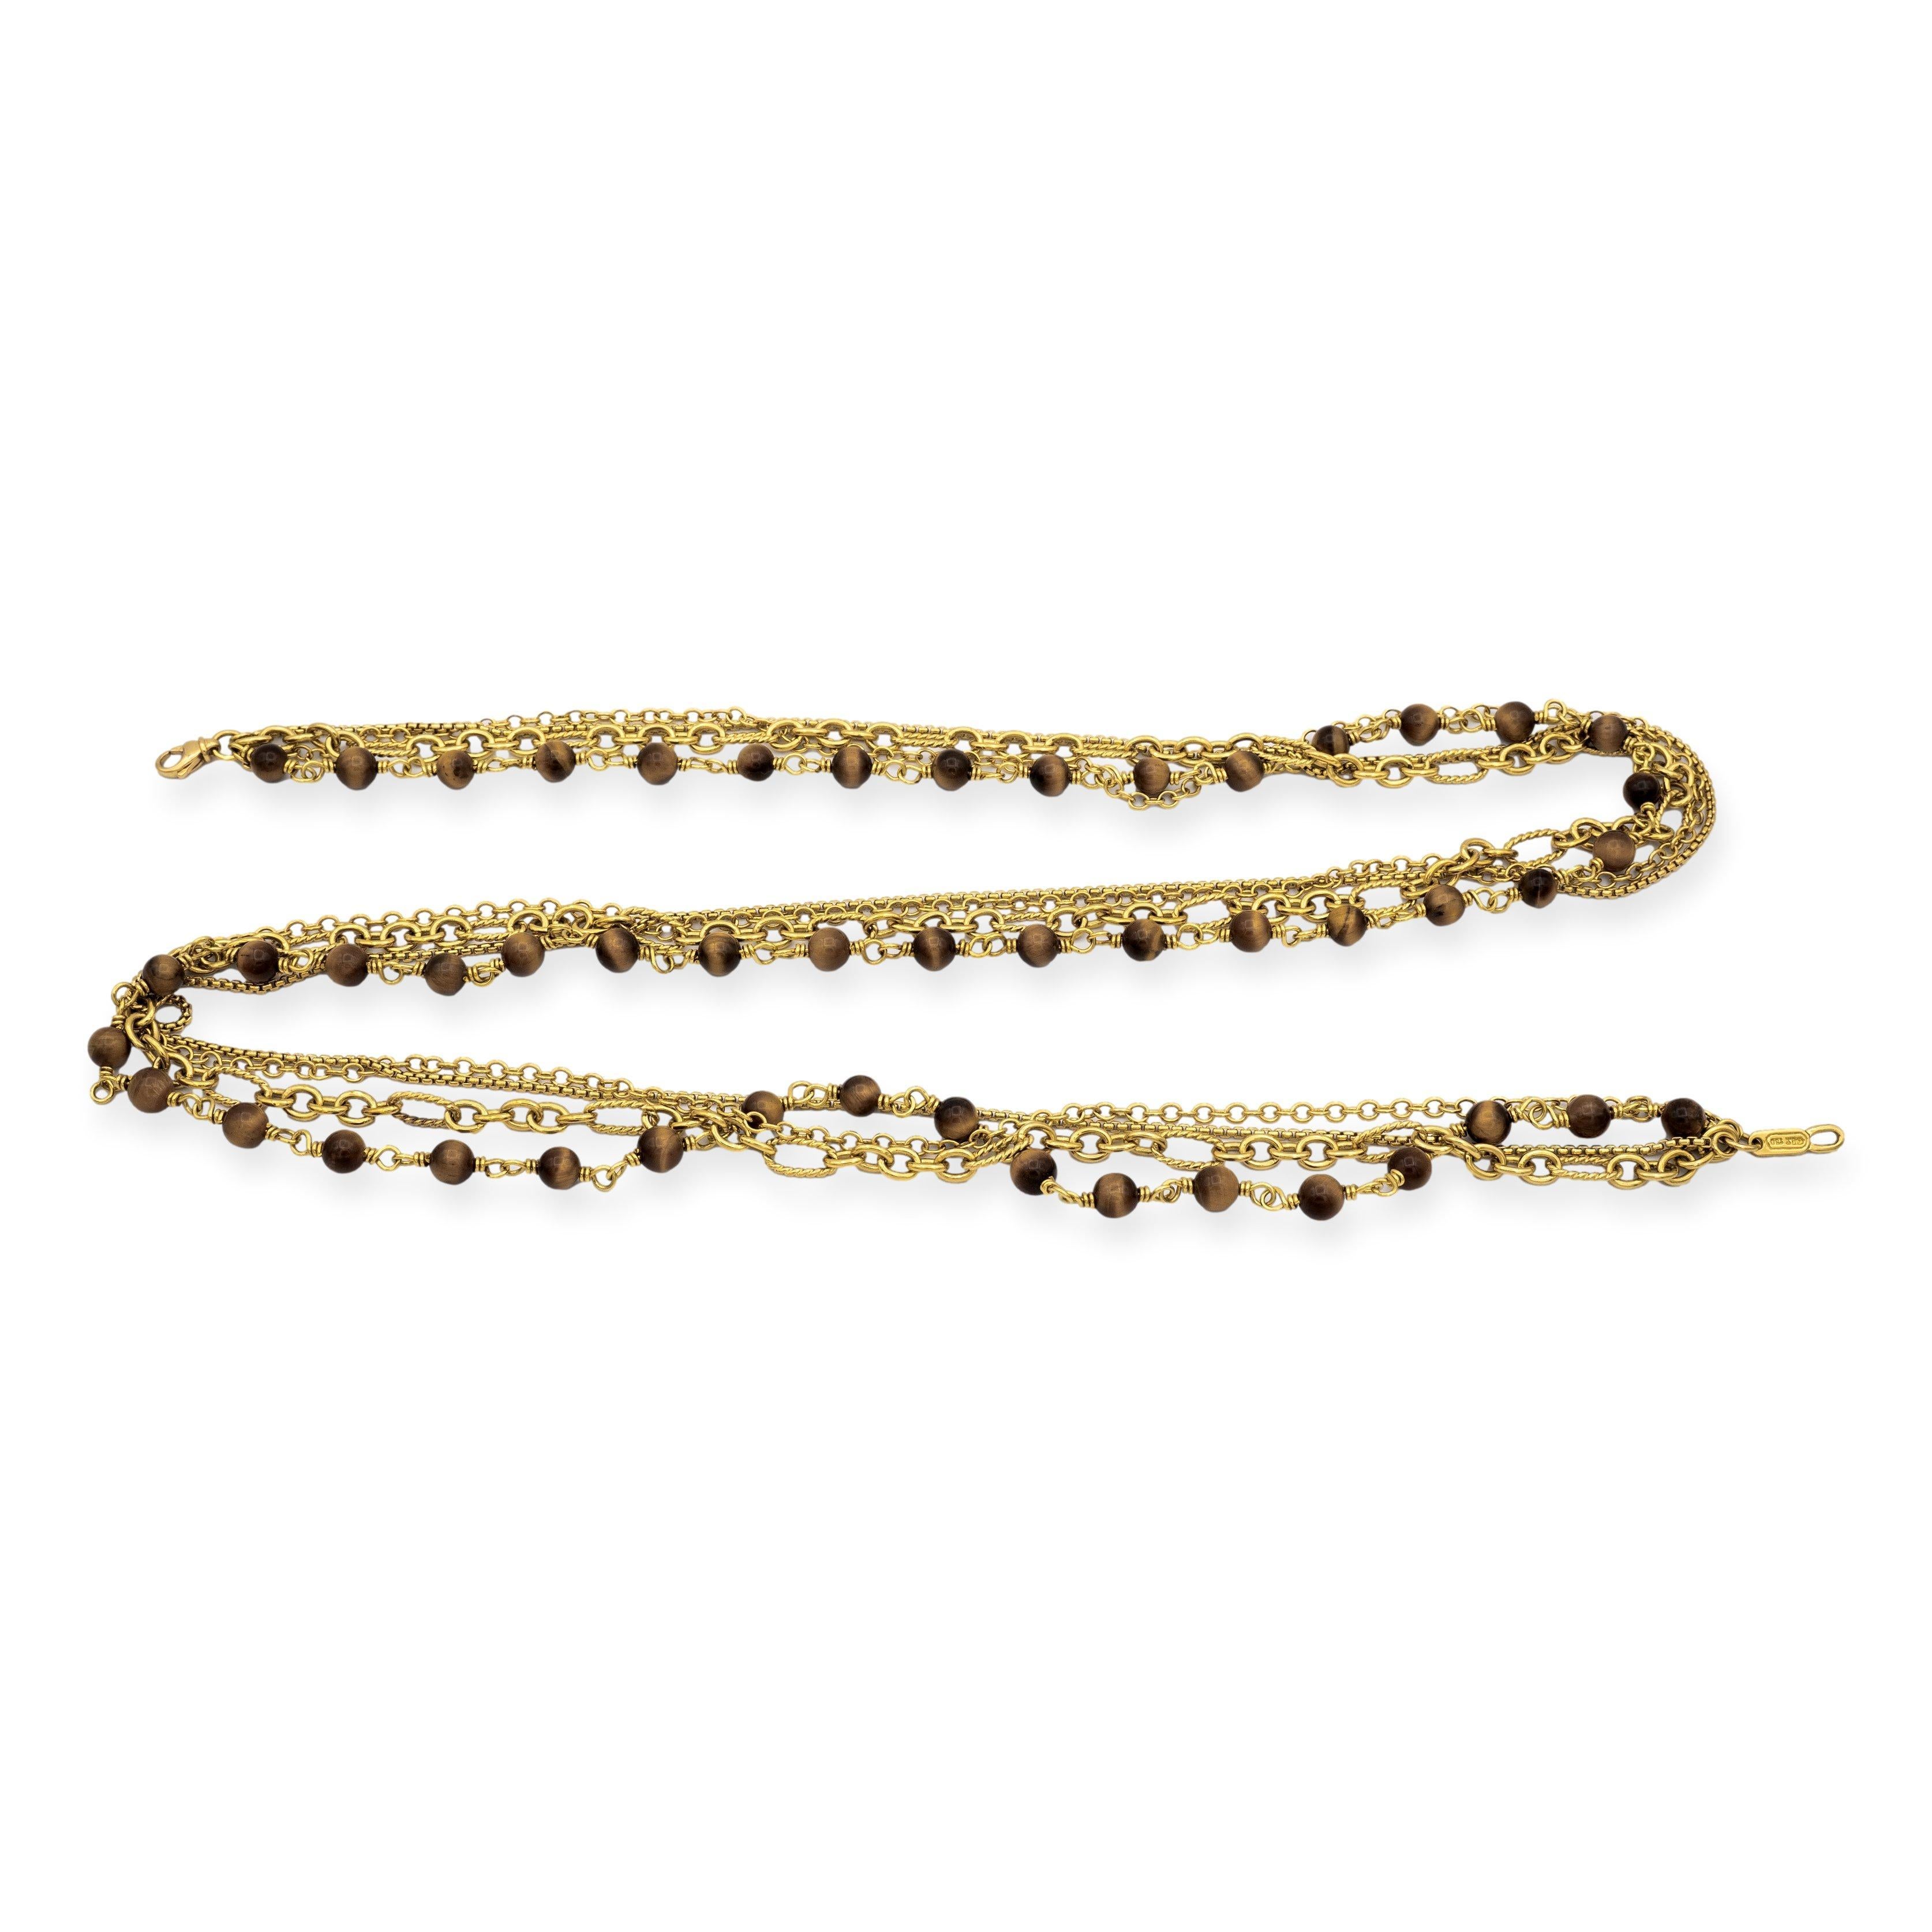 David Yurman Multi Chain necklace is layered by four strands from Yurman's signature link chain collections, with one strand adorned with 50 tiger eye spiritual beads measuring 6 mm each. This 31 inch necklace is secured by a convenient lobster